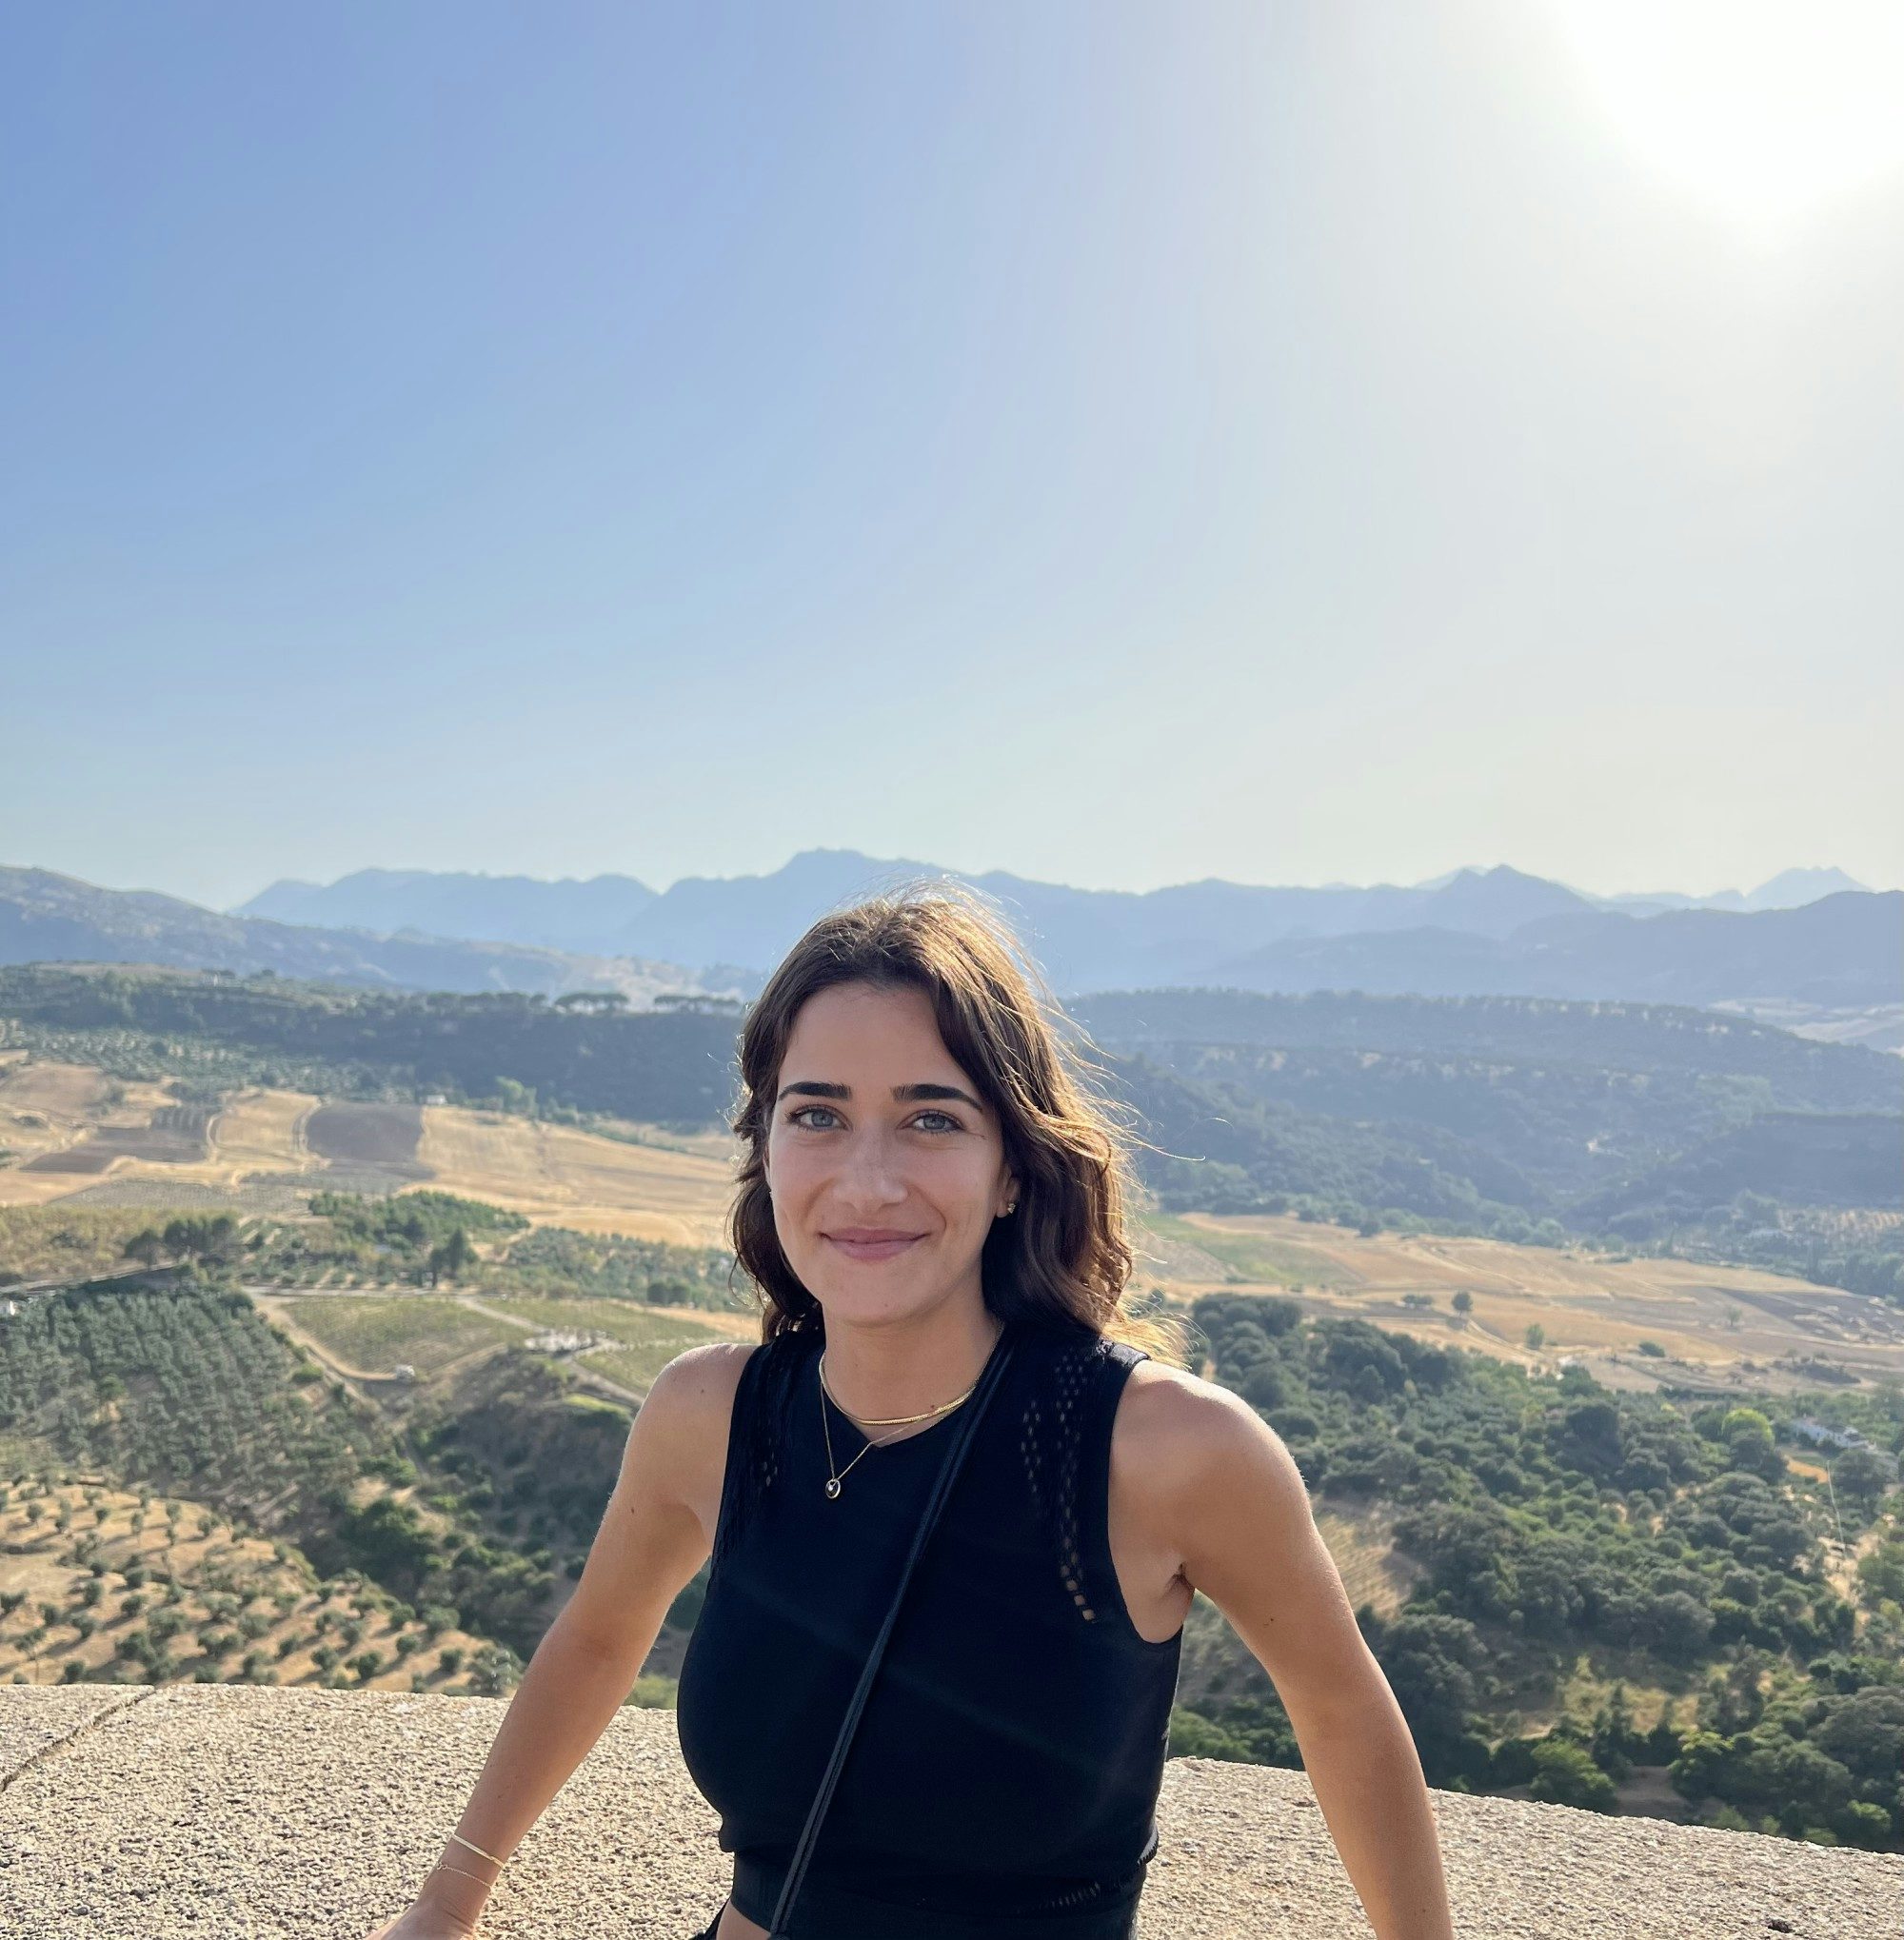 Travel advisor Deemah Bader in a black tank top smiling in front of a sunlit valley